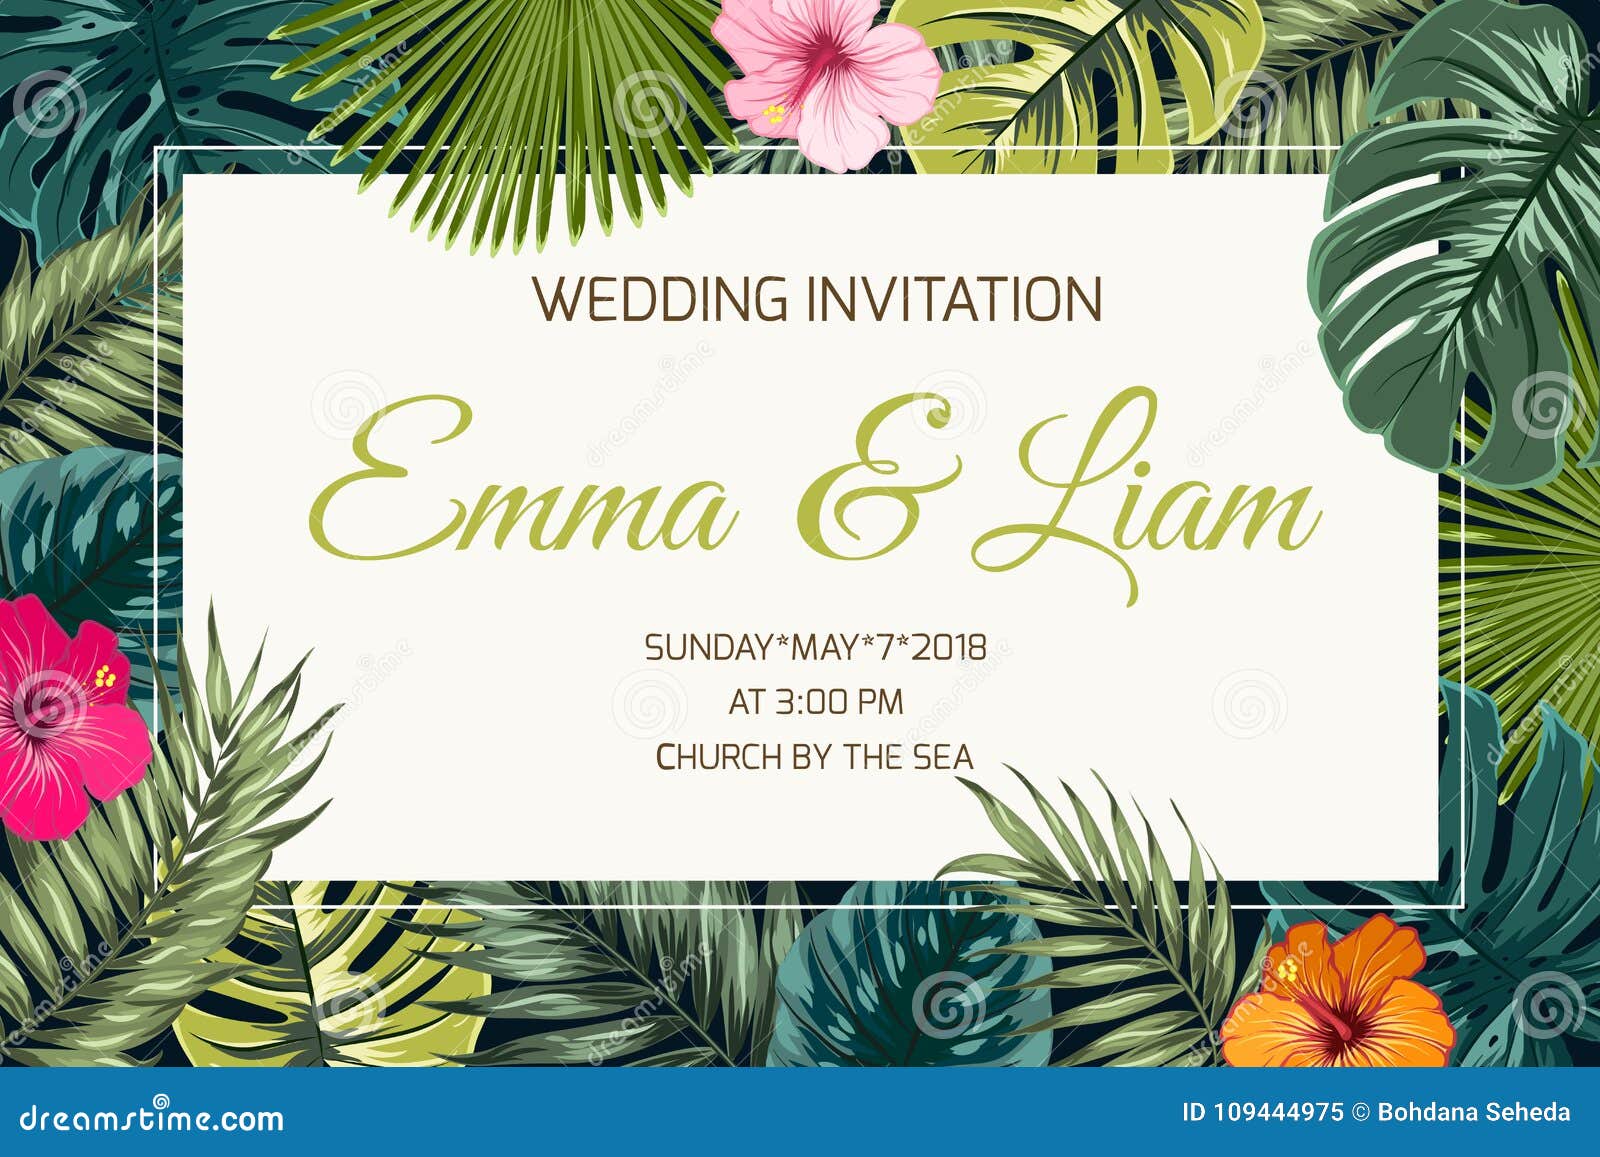 Exotic Tropical Jungle Wedding Event Invitation Stock Vector With Regard To Event Invitation Card Template